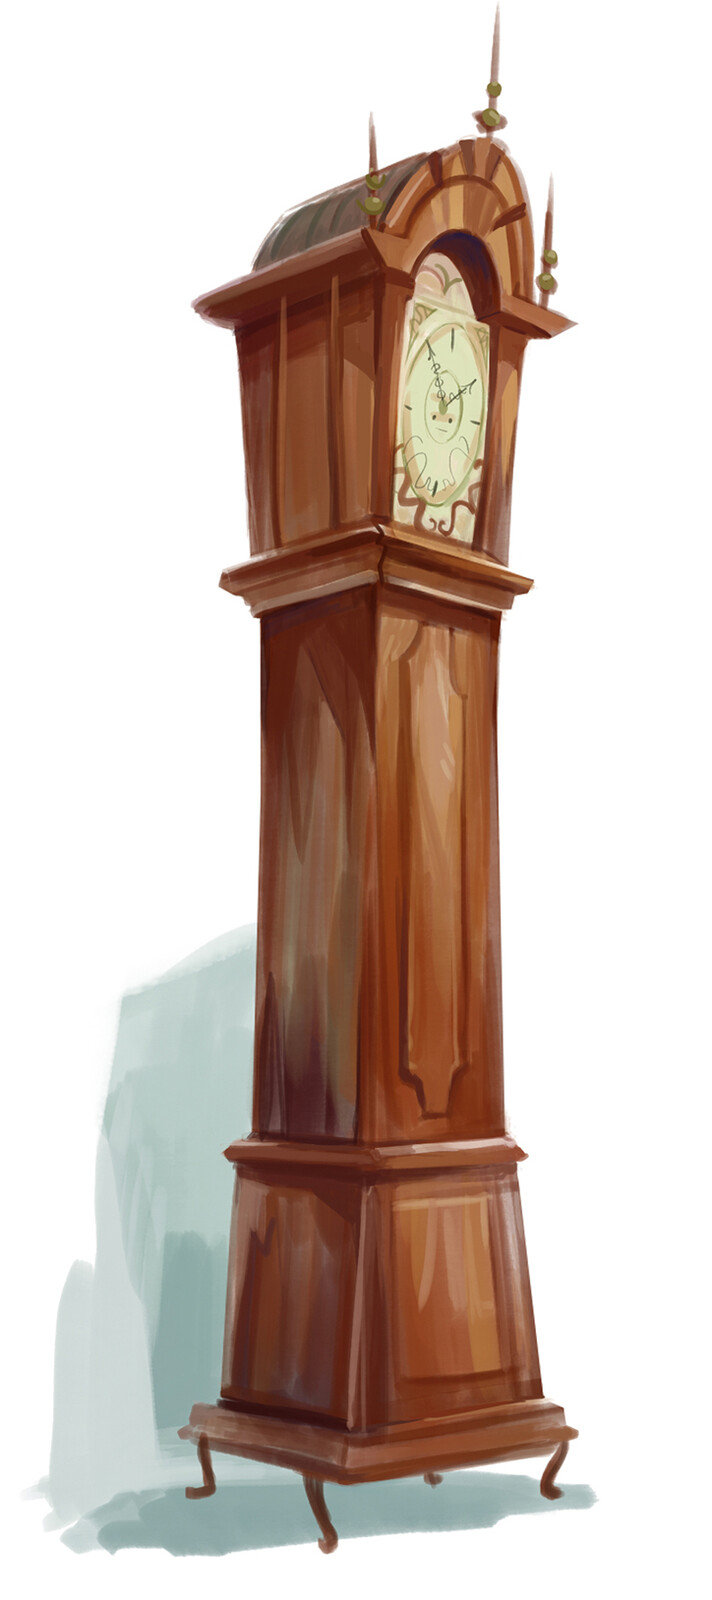 Grandfather clock and other antique furniture